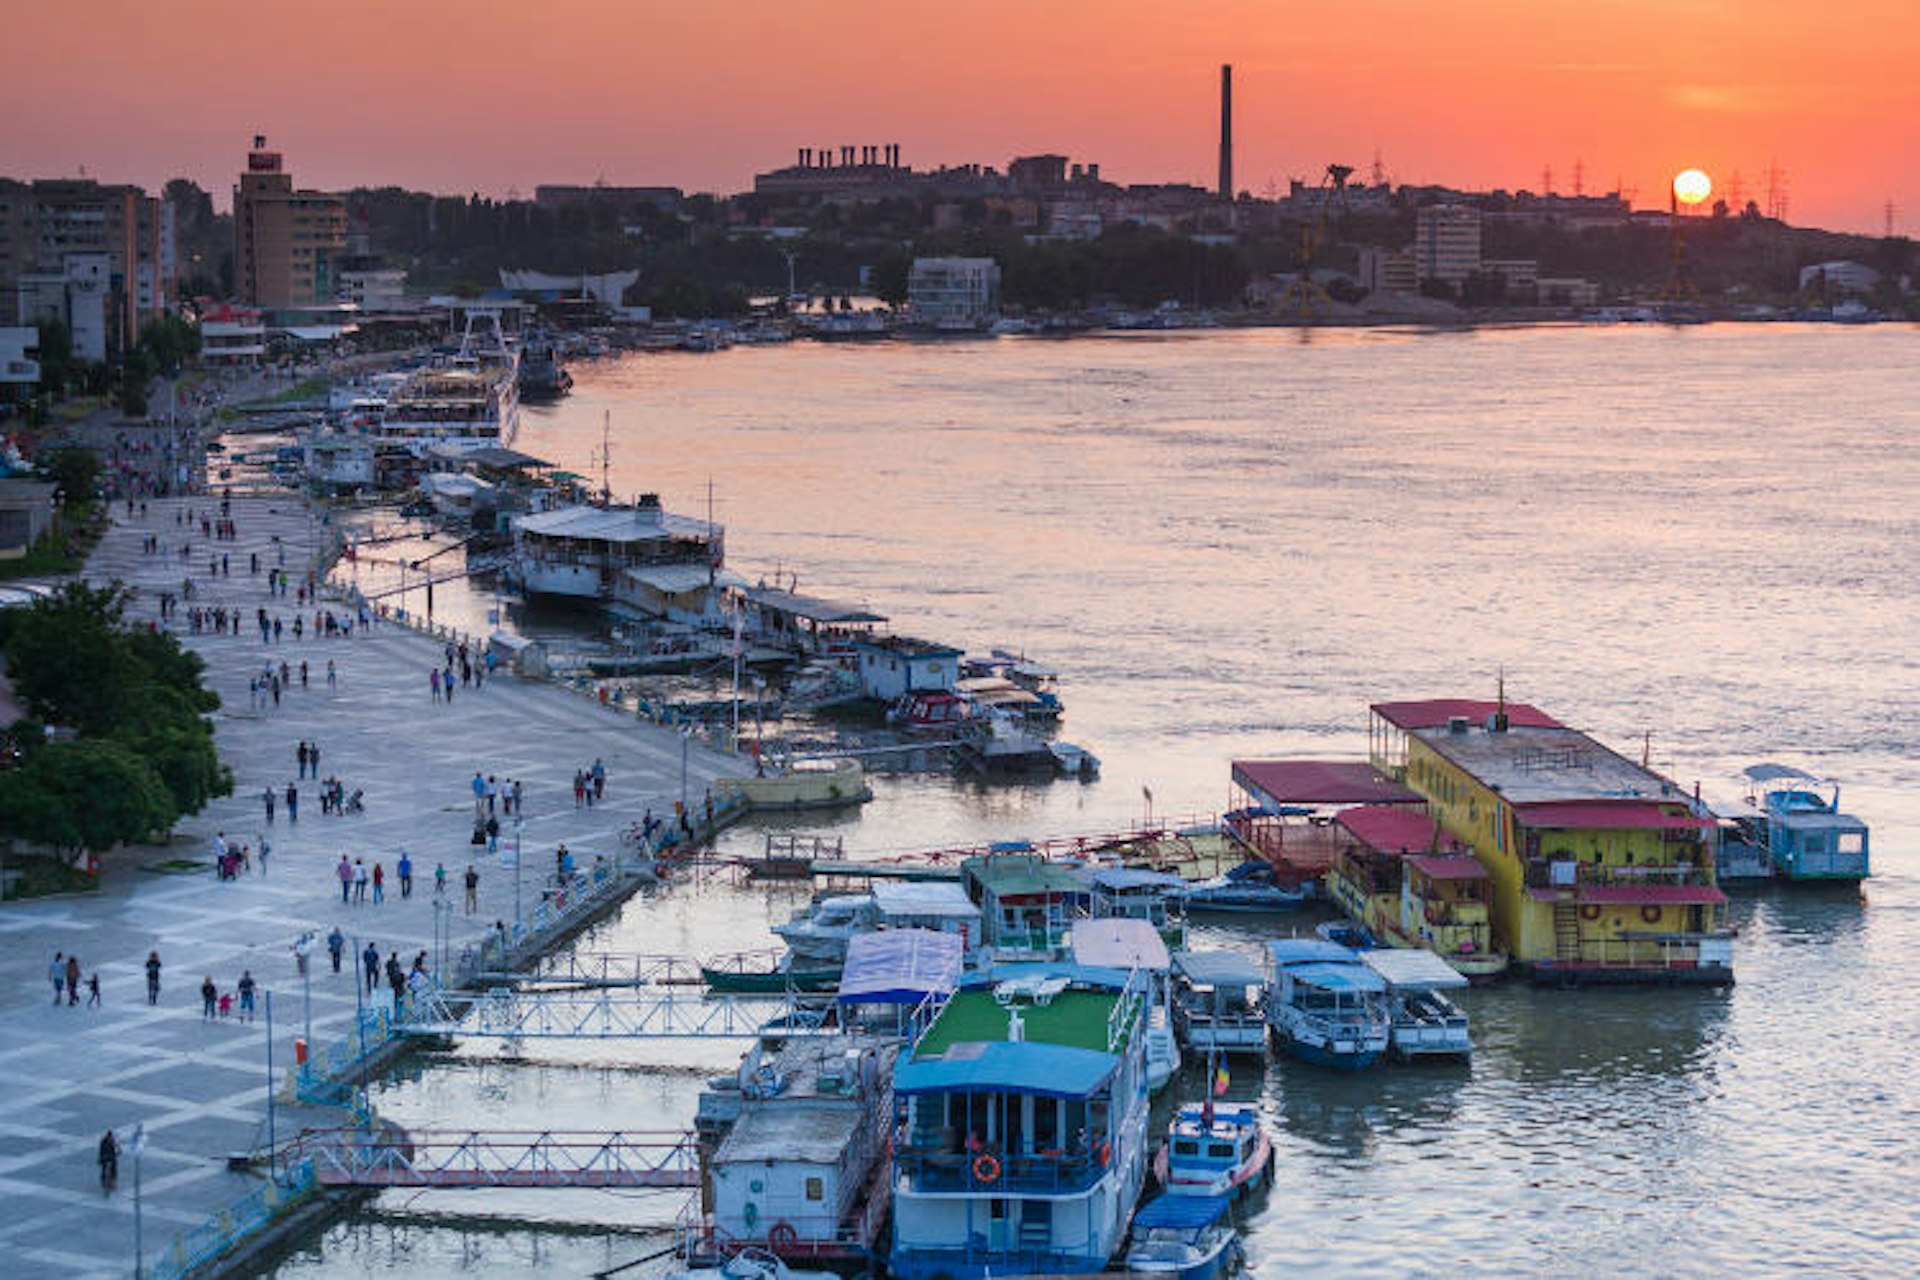 Sun setting over Tulcea port on the Danube. Image by Walter Bibikow / The Image Bank / Getty Images